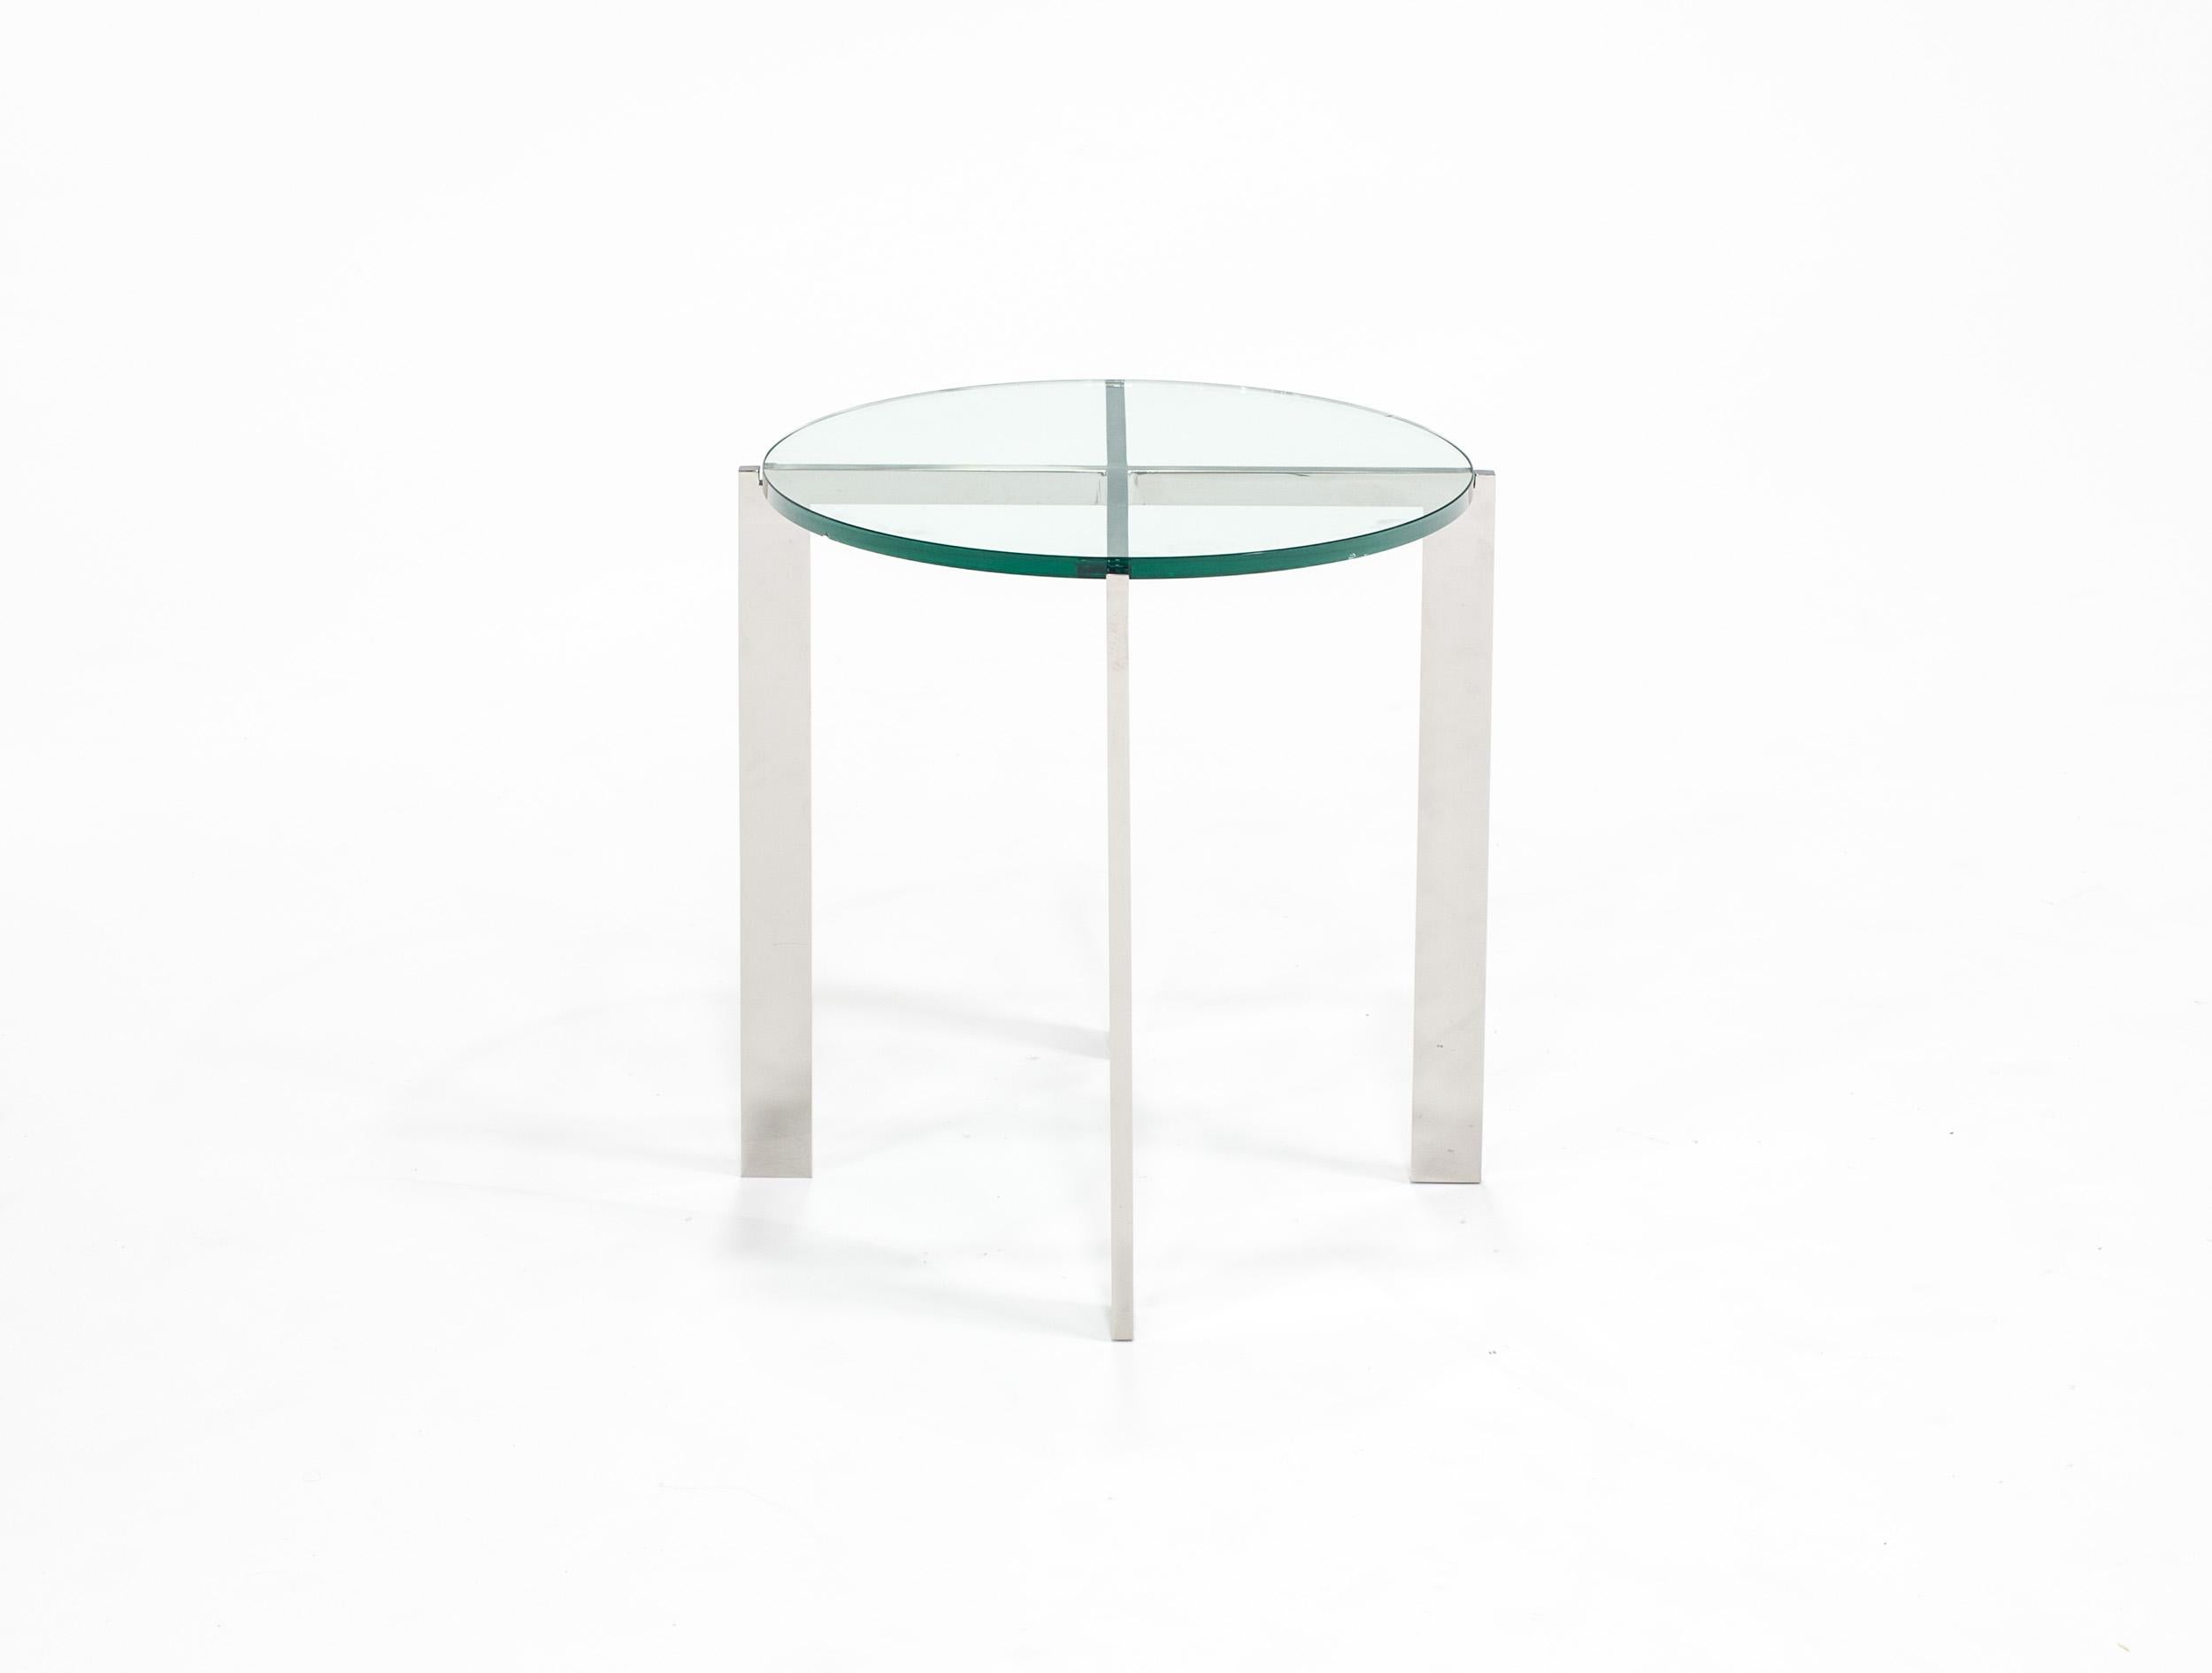 HOLLY HUNT Morgan side table in stainless steel base with glass top. Clean lines with a modern sensibility, a quiet piece that will cooperate with any style.

Additional Information:
Base: M17 Polished Stainless Steel
Top: Glass
Condition: Showroom